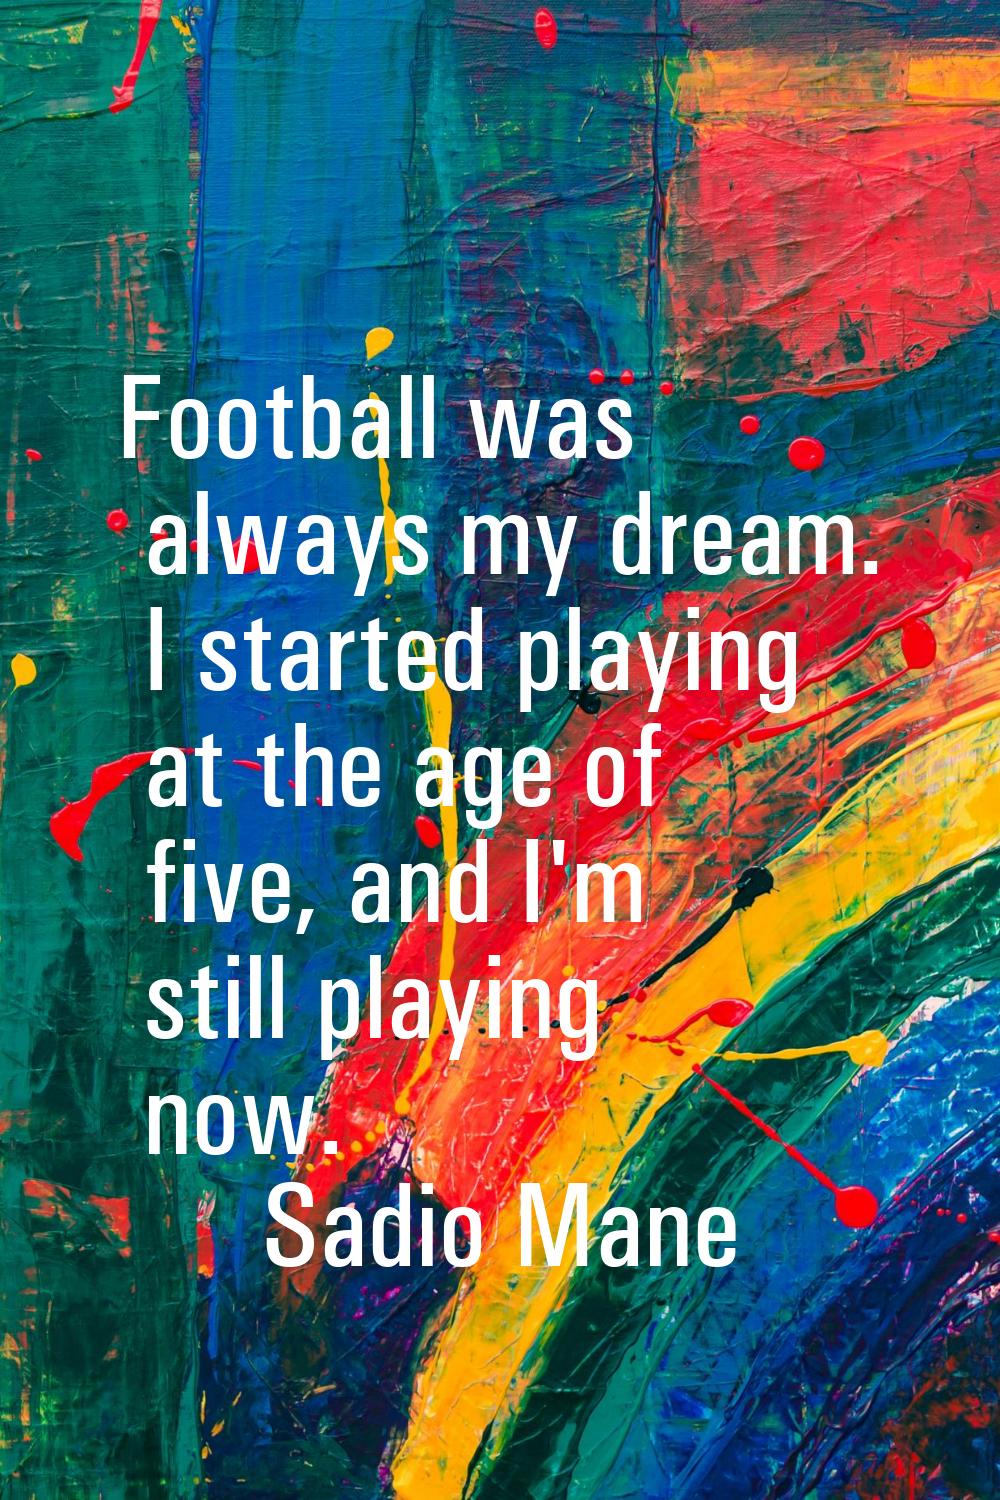 Football was always my dream. I started playing at the age of five, and I'm still playing now.